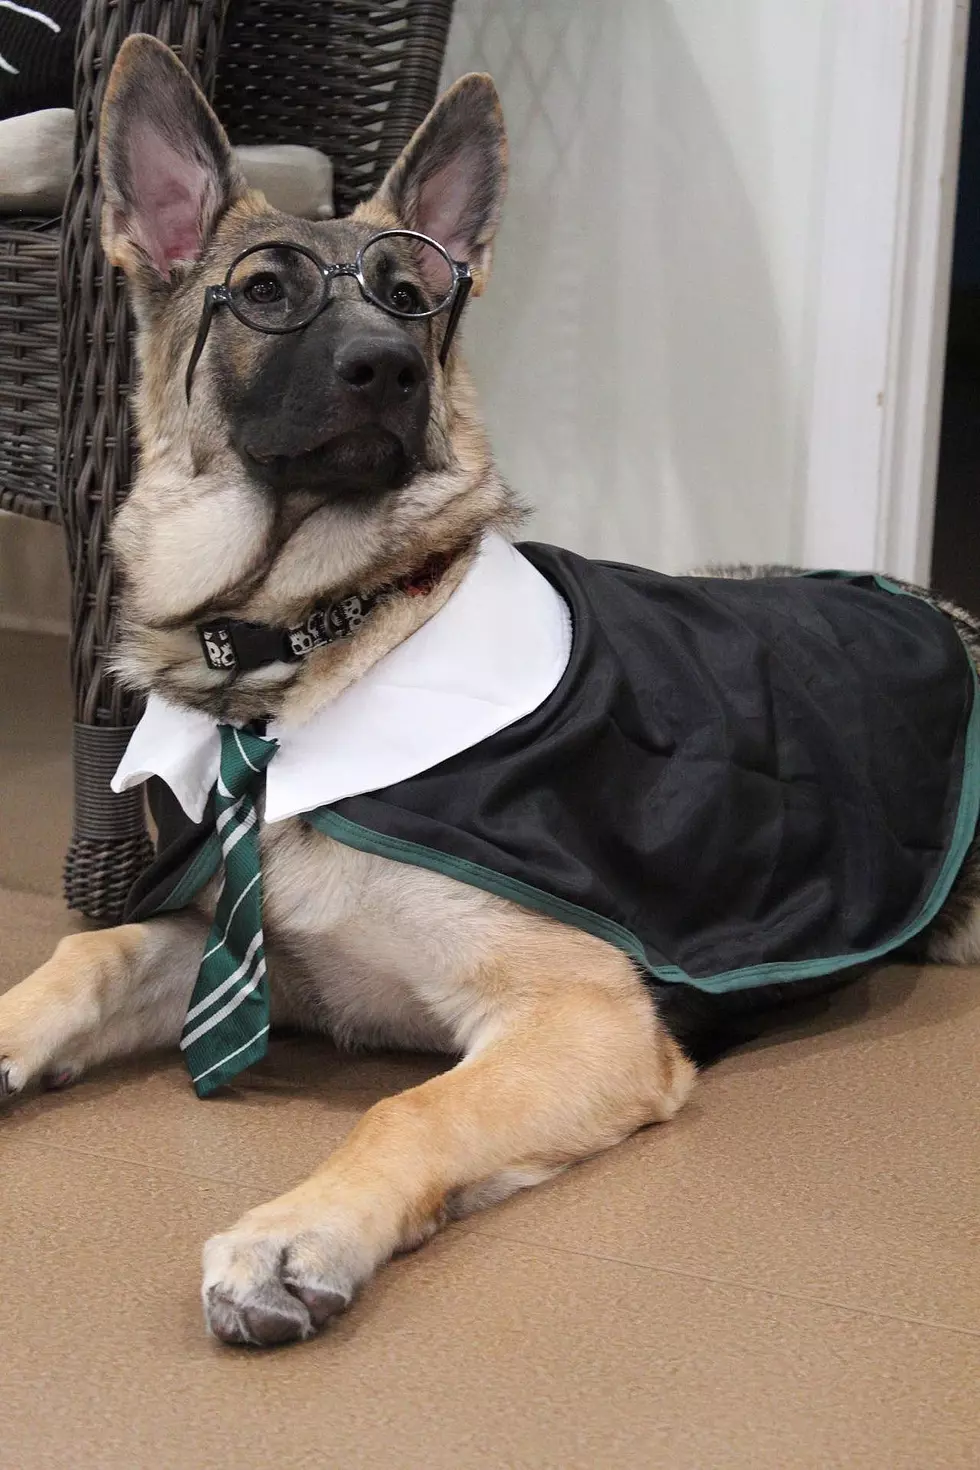 Show Us Your Pets in Costume for Pet-O-Ween 2022